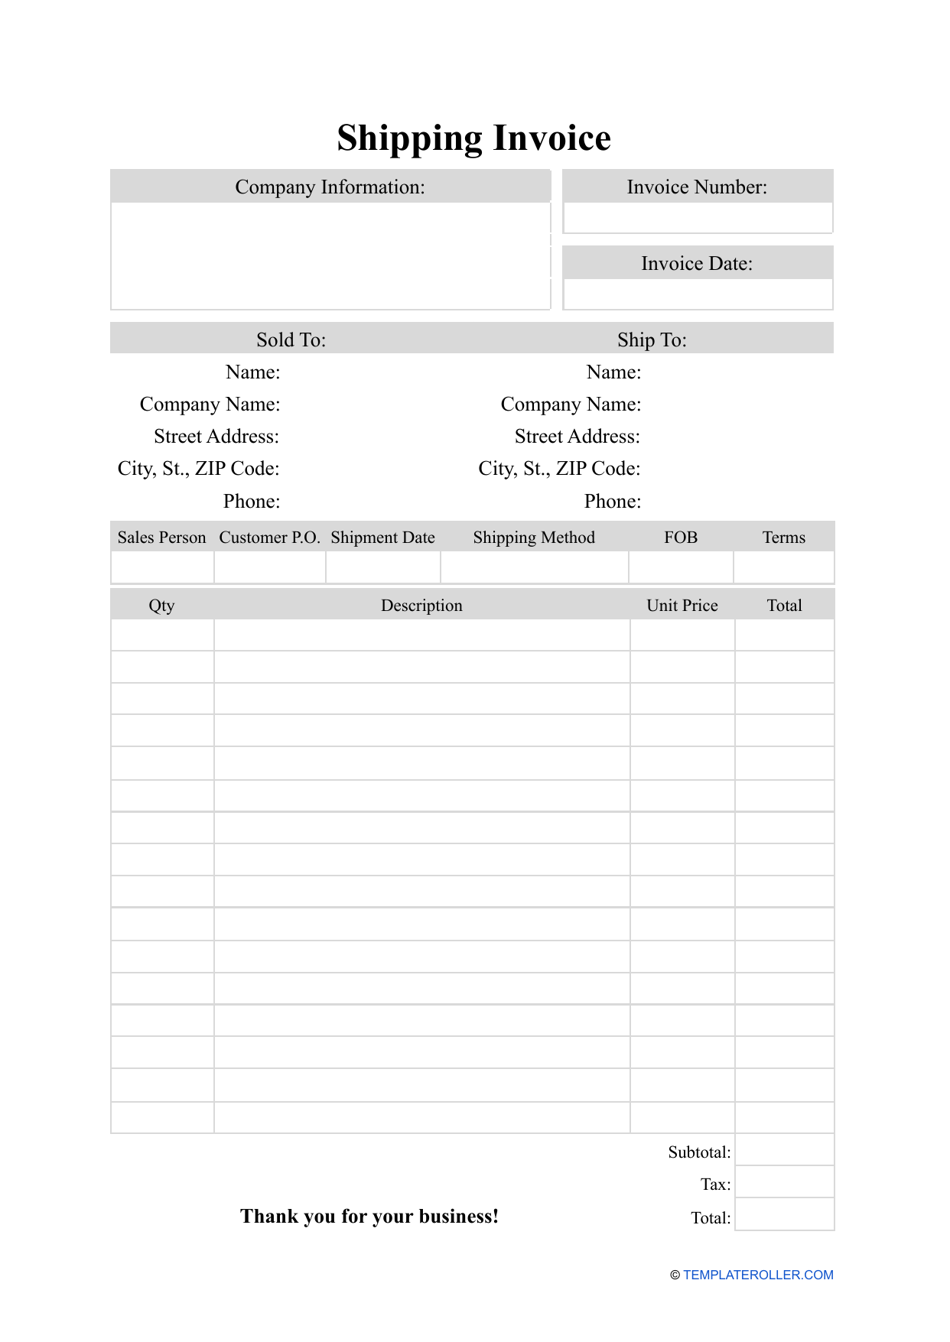 Shipping Invoice Template Fill Out, Sign Online and Download PDF